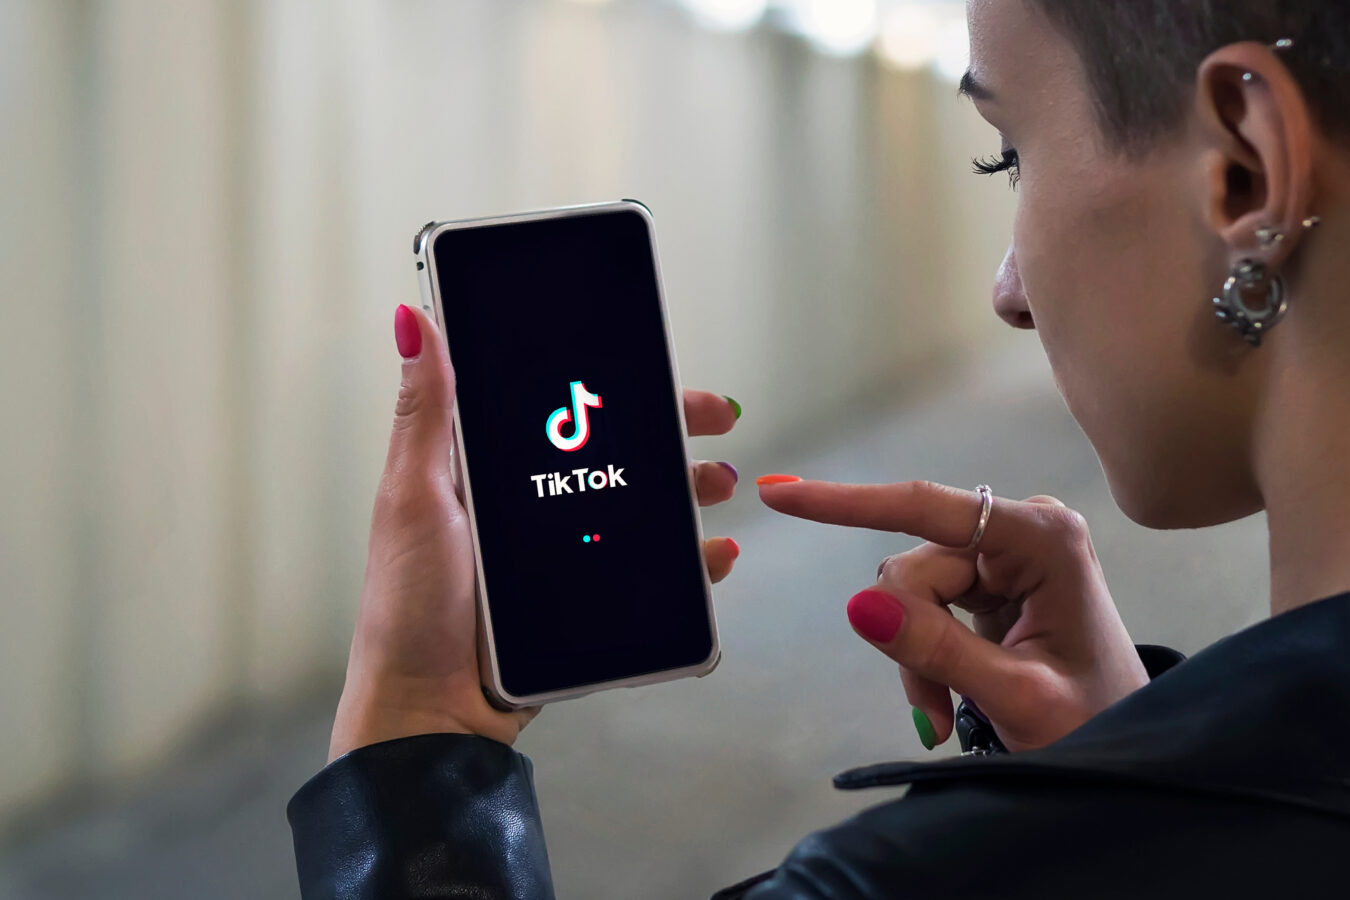 an image showing a young person using tiktok for social media marketing purposes.